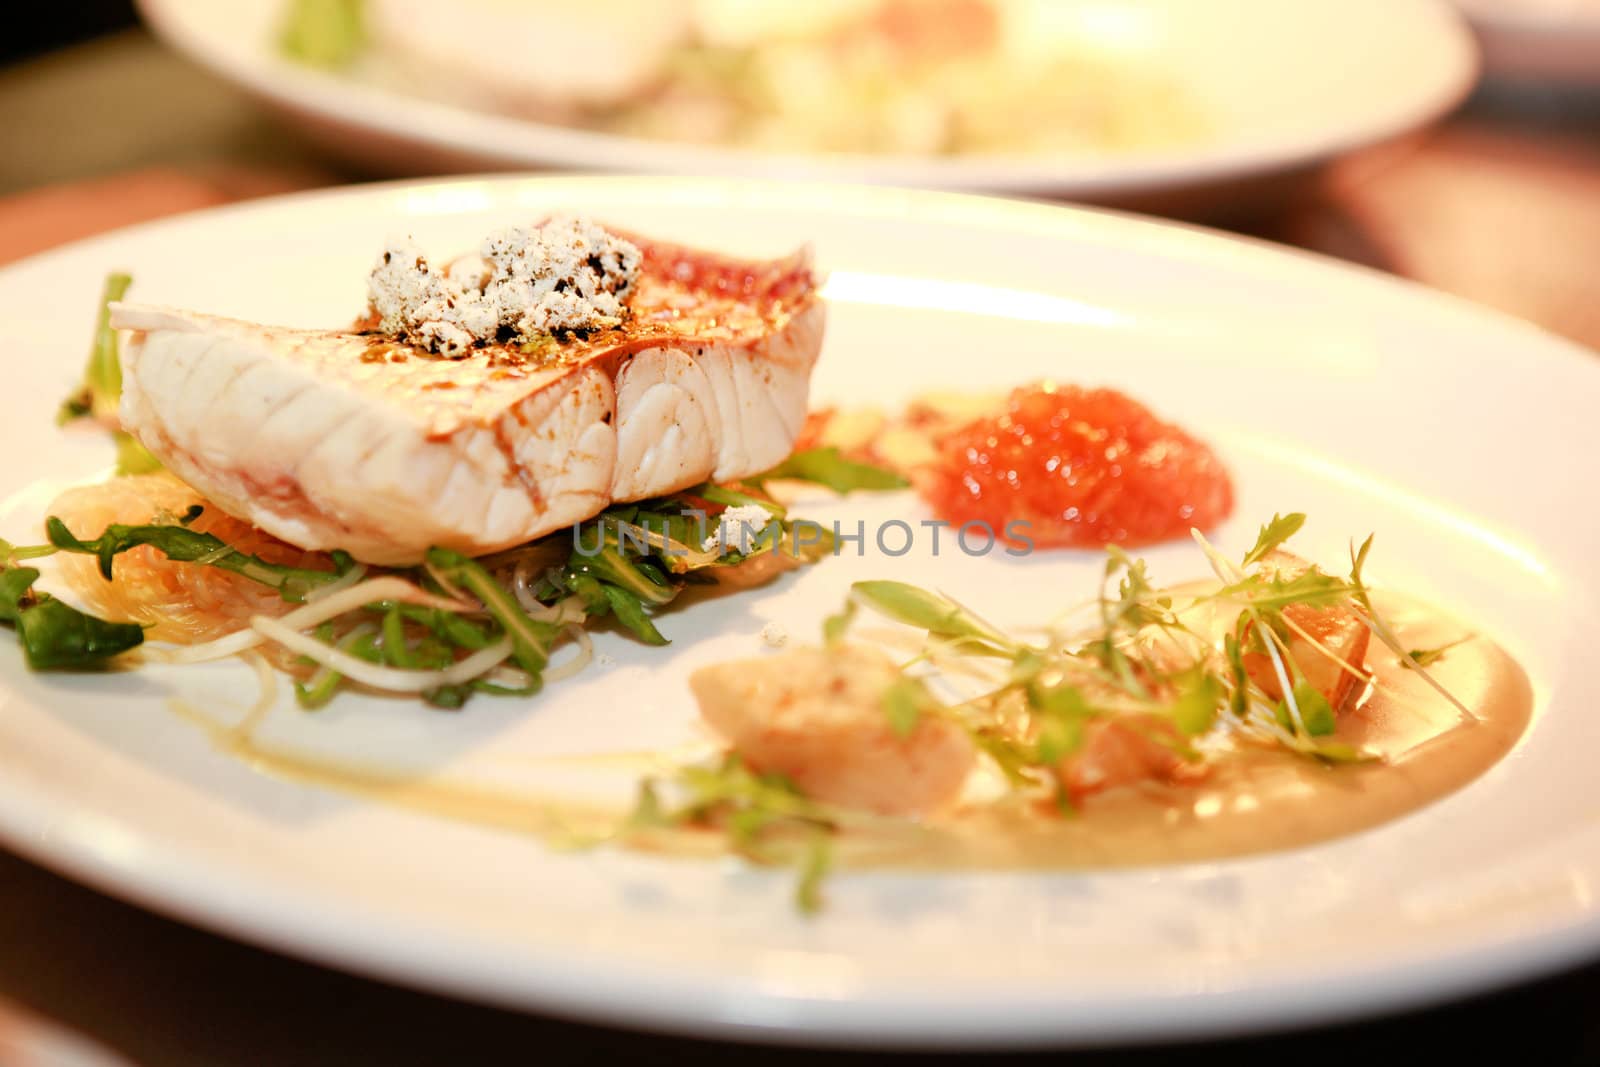 Delicious gourmet seafood meal by jrstock